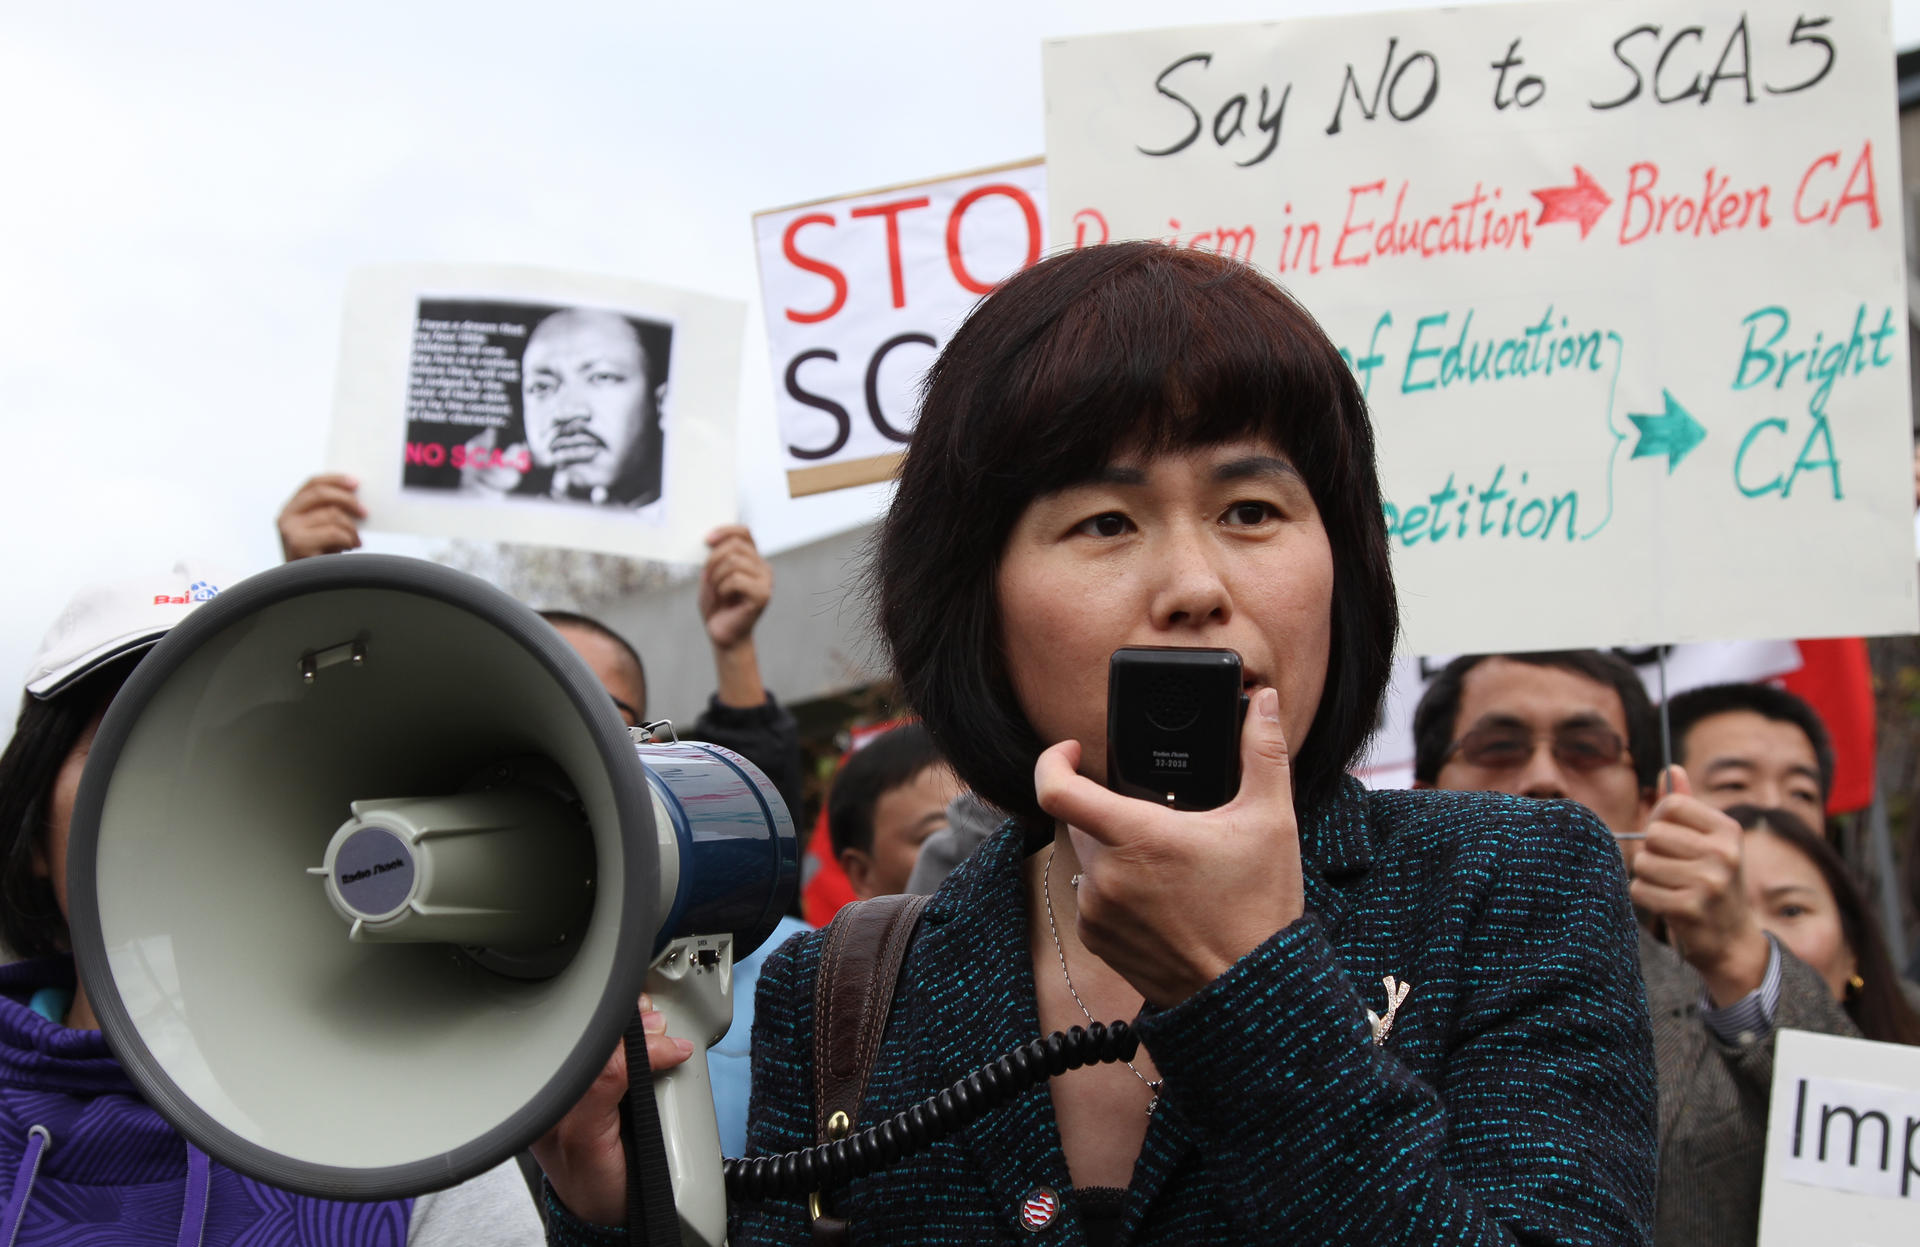 A community leader speaks to the crowd at a rally against the proposed college admissions amendment outside the town hall in Cupertino, California. Photo: Guisel Contreras